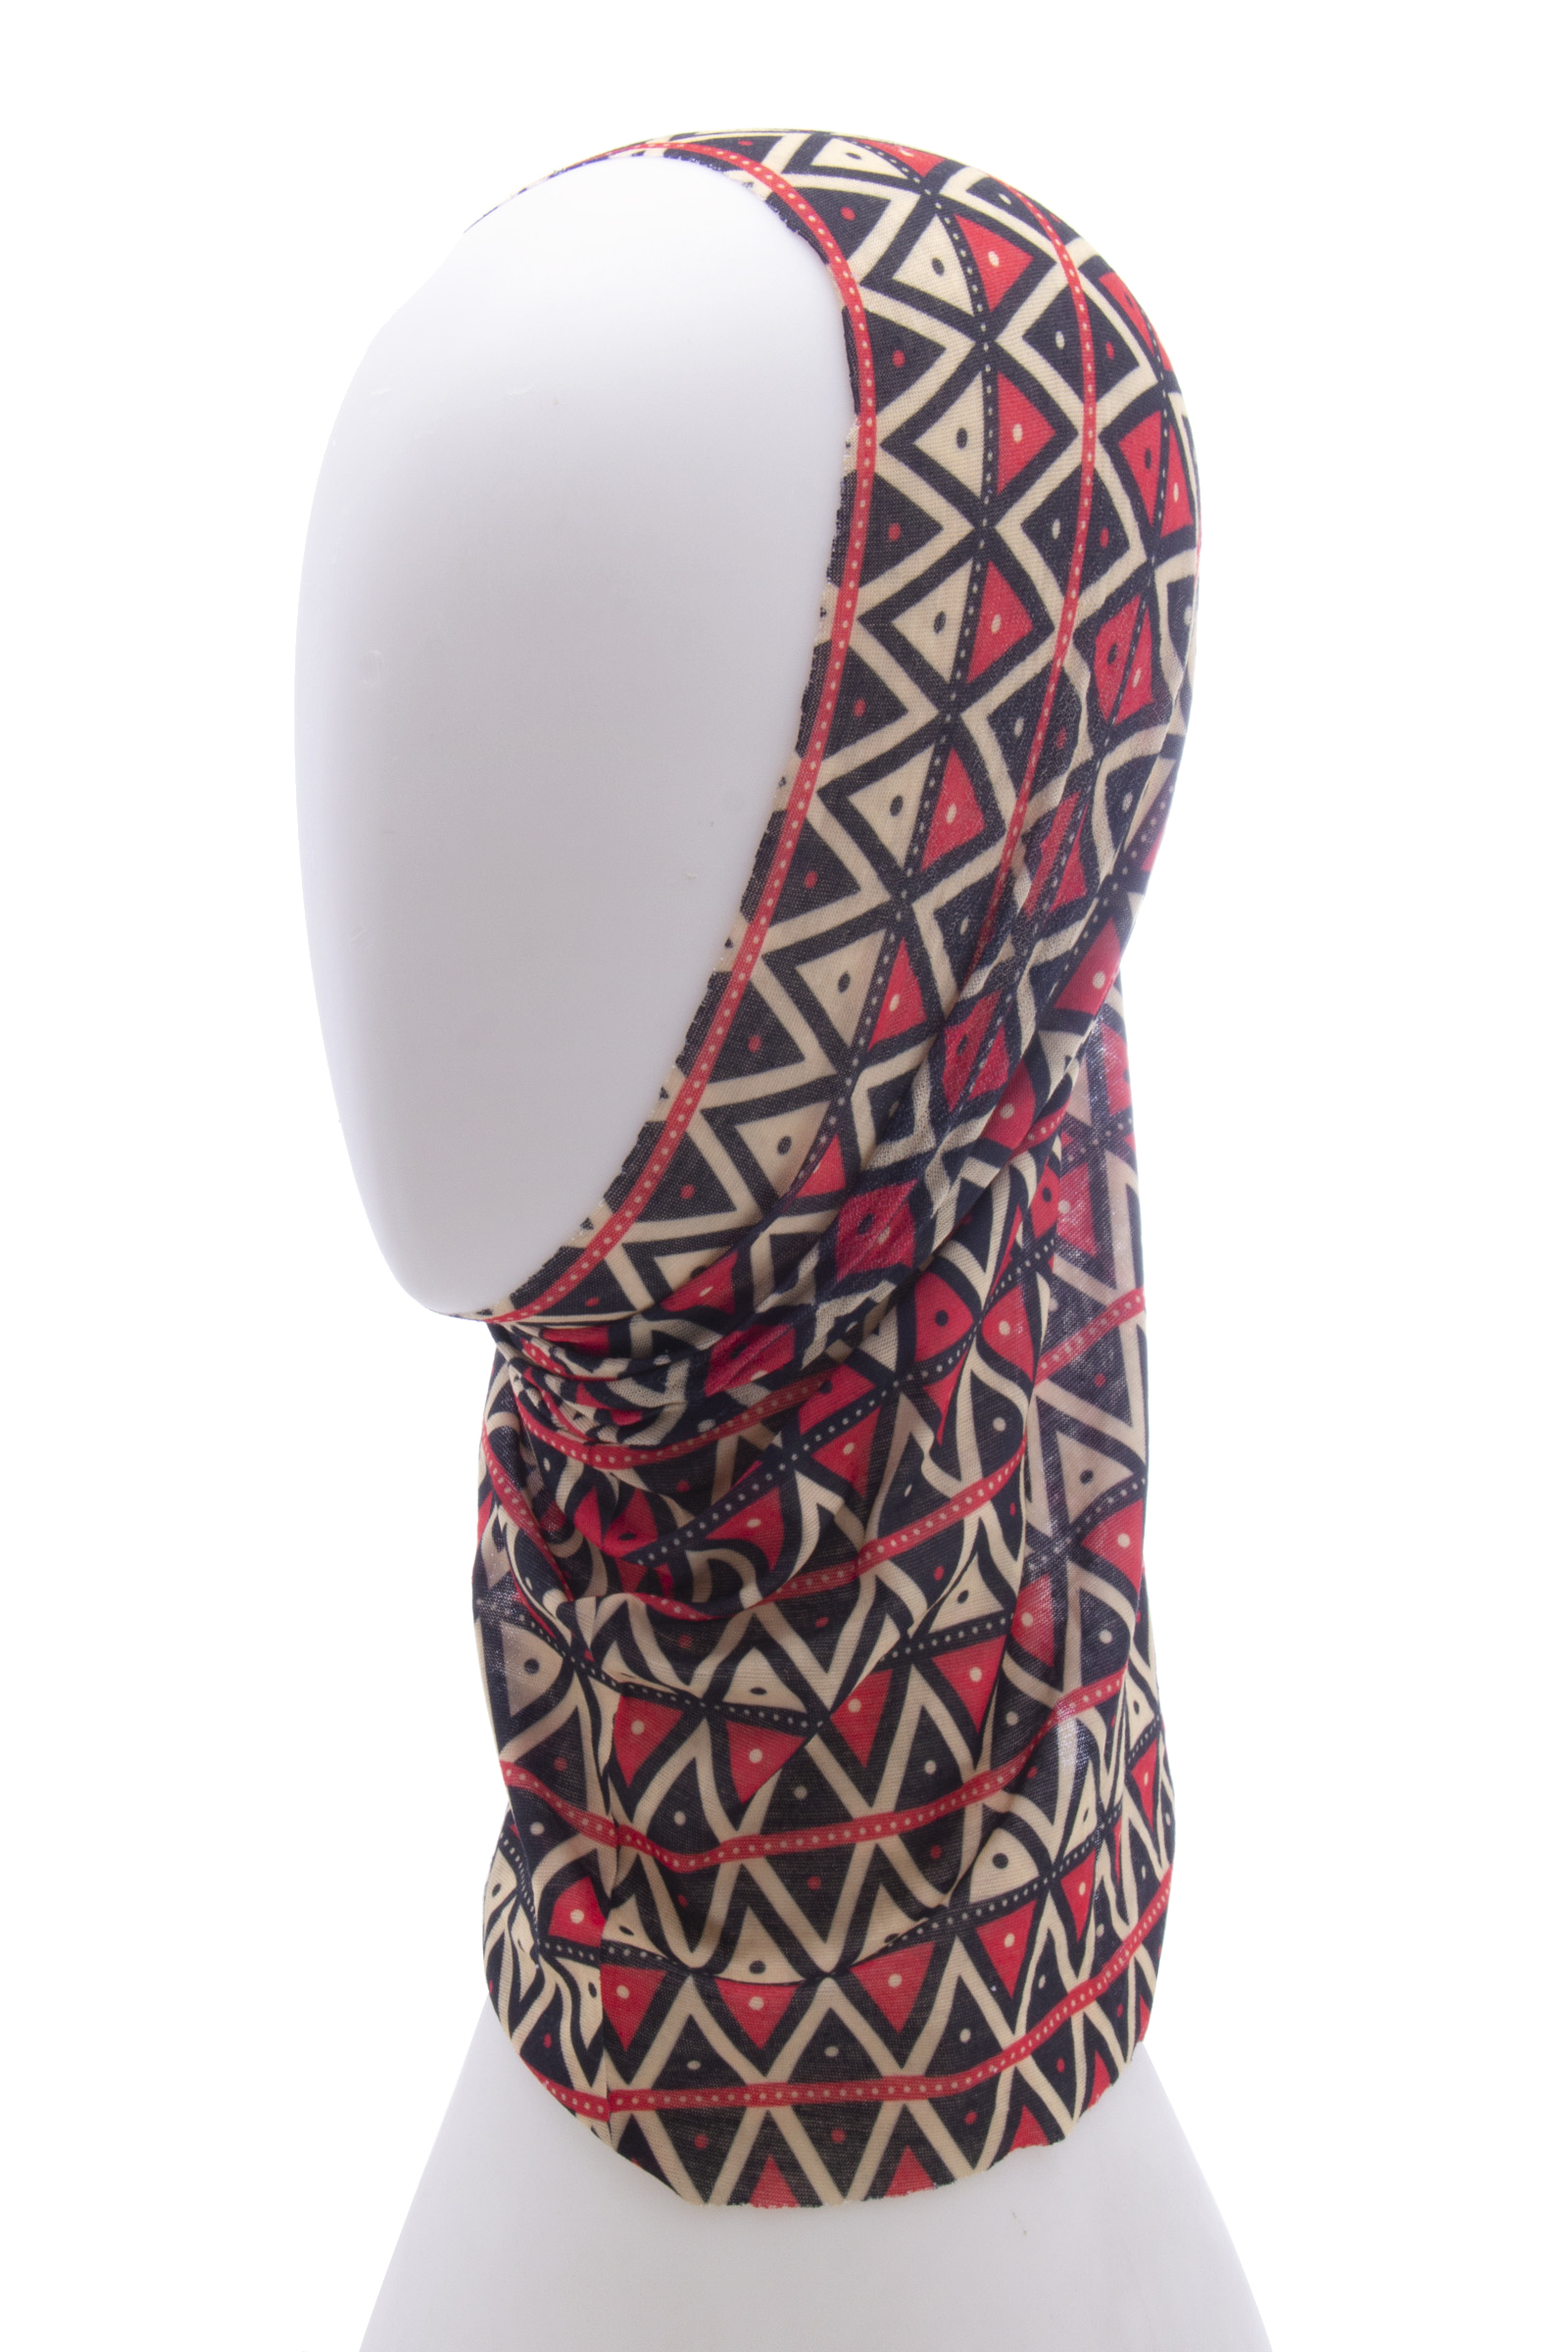 ABSTRACT PATTERN MULTIFUNCTIONAL SEAMLESS WEAR